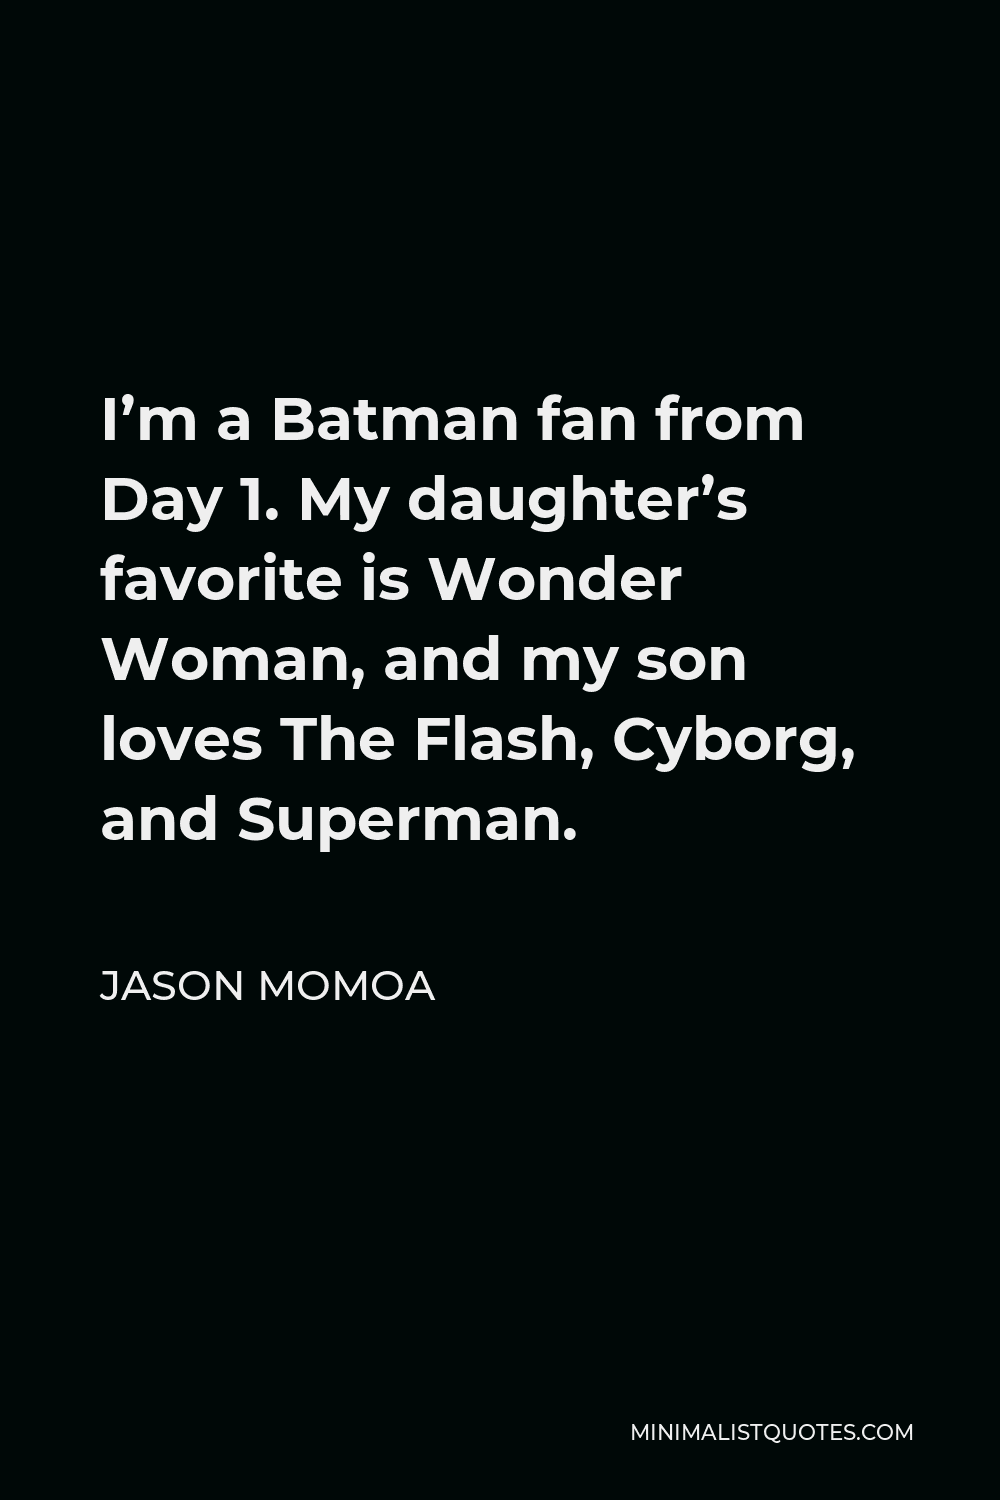 Jason Momoa Quote - I’m a Batman fan from Day 1. My daughter’s favorite is Wonder Woman, and my son loves The Flash, Cyborg, and Superman.